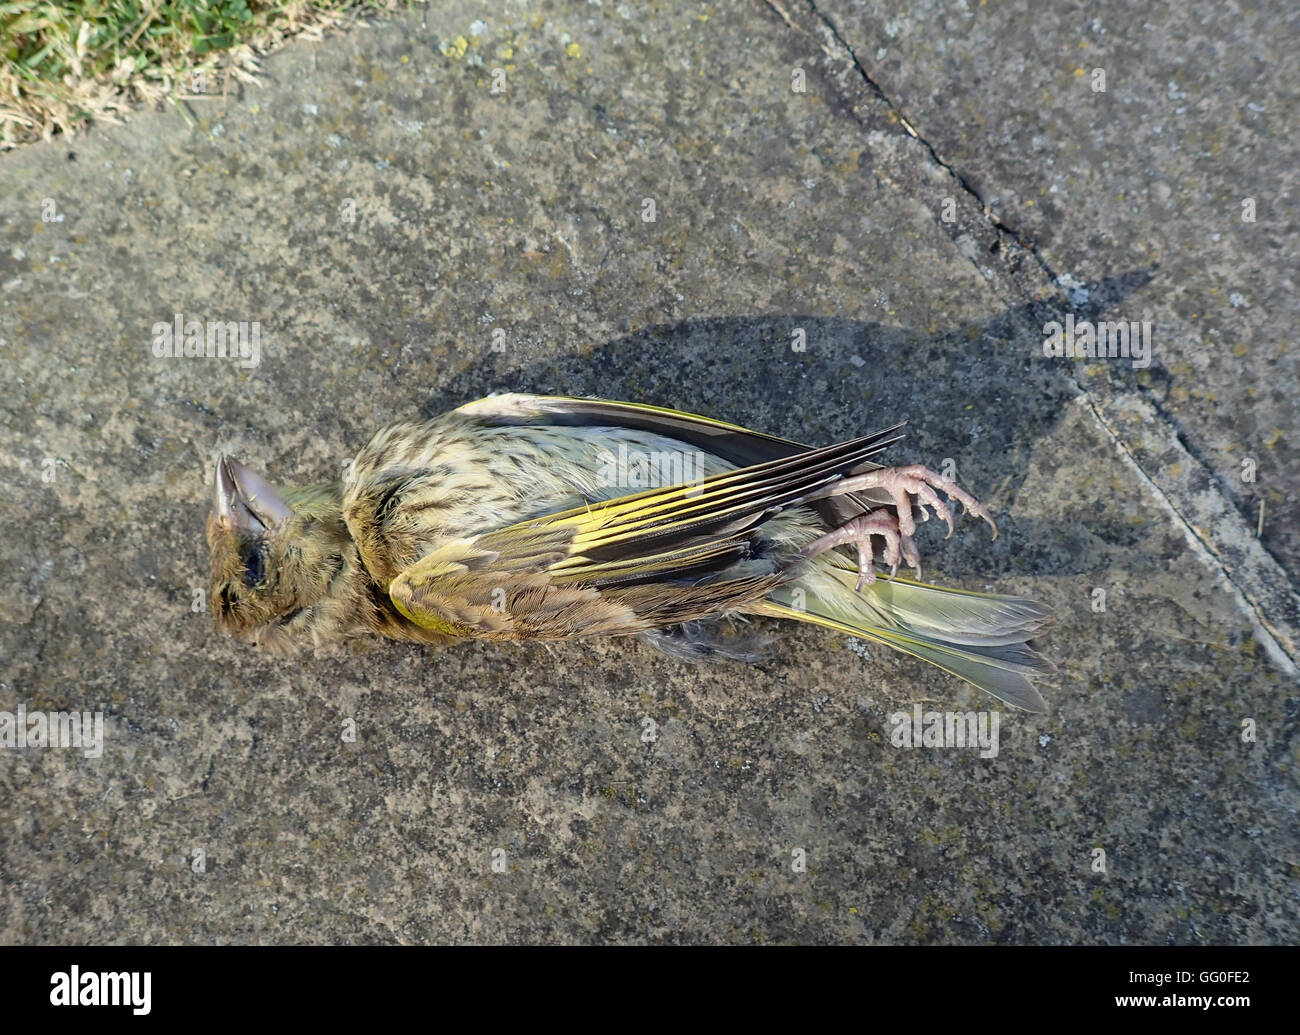 Dead juvenile greenfinch (Carduelis chloris) lying on its back on a limestone pavement Stock Photo